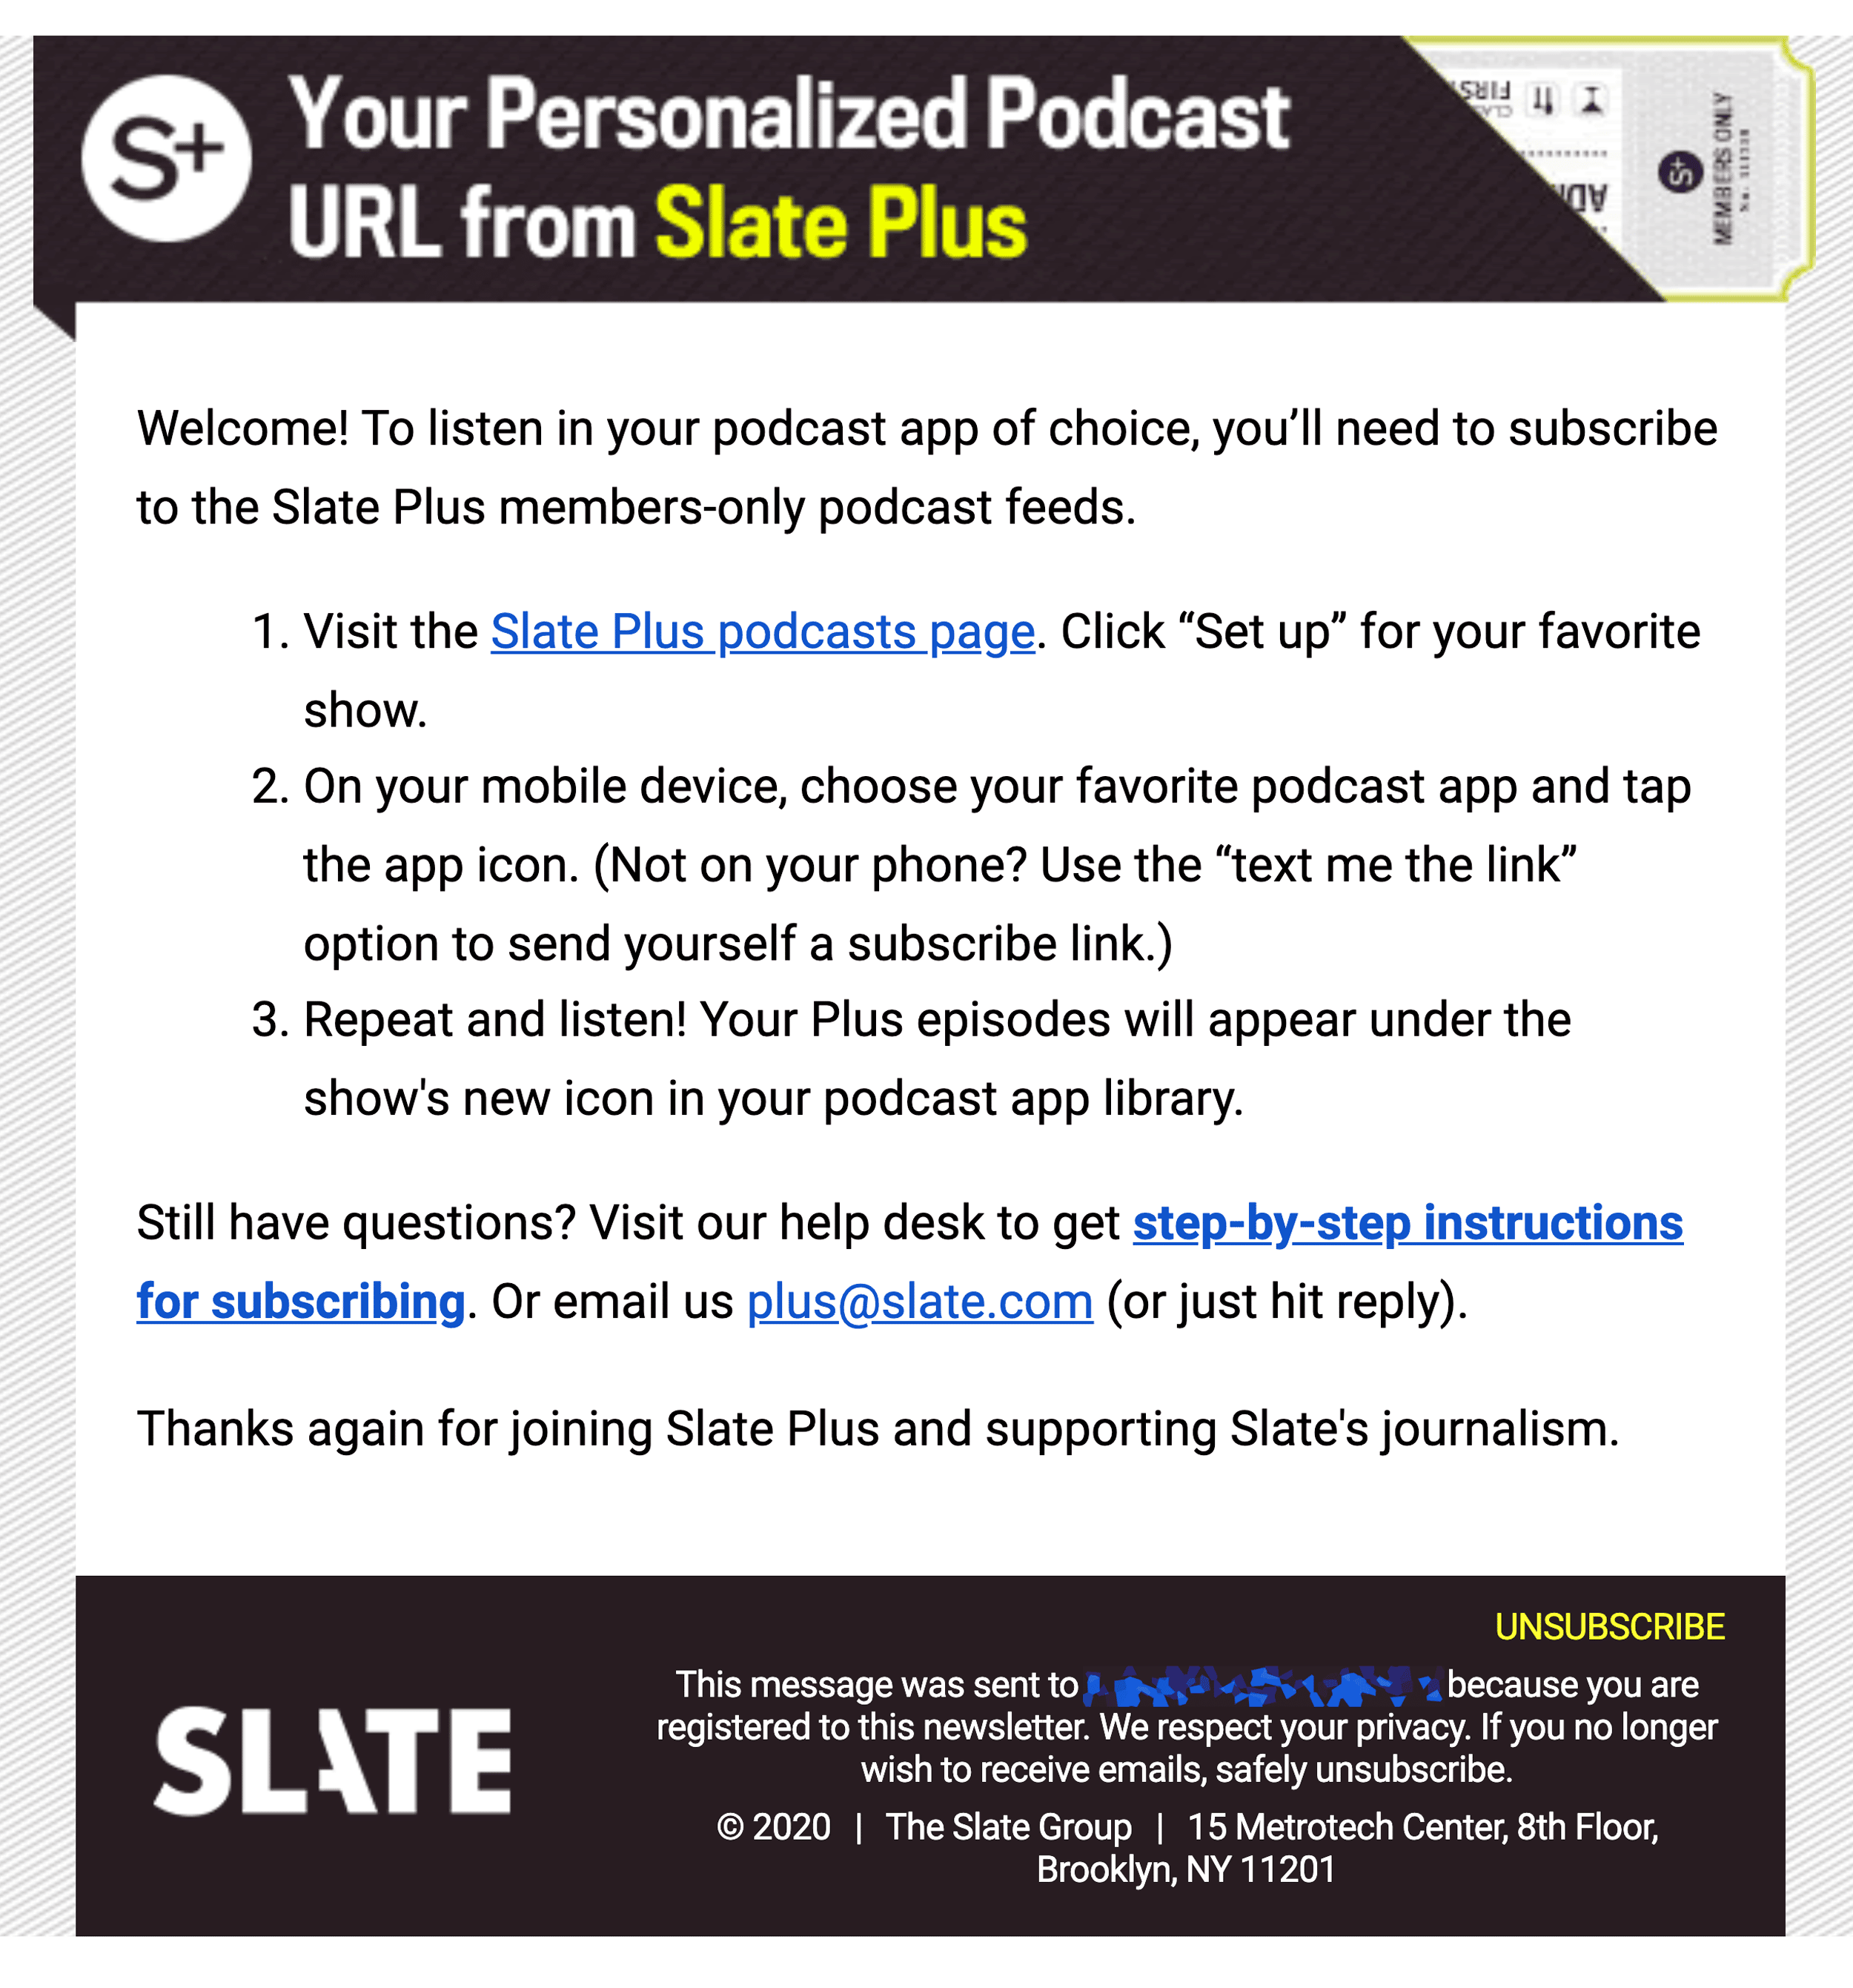 Slate Plus Subscriber Only Podcasts Email